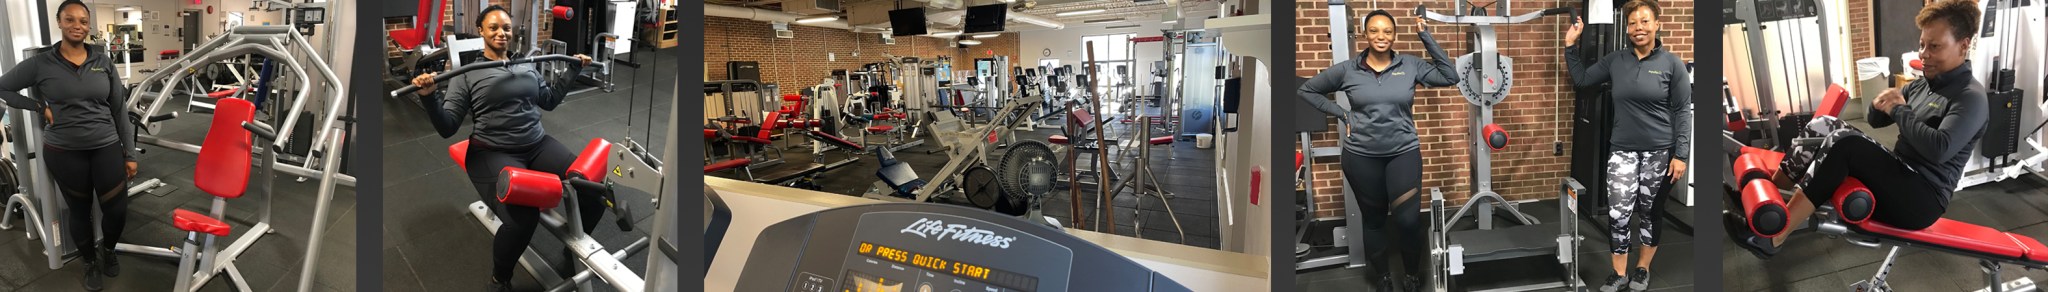 Quick Glance Inside of the Fitness Center